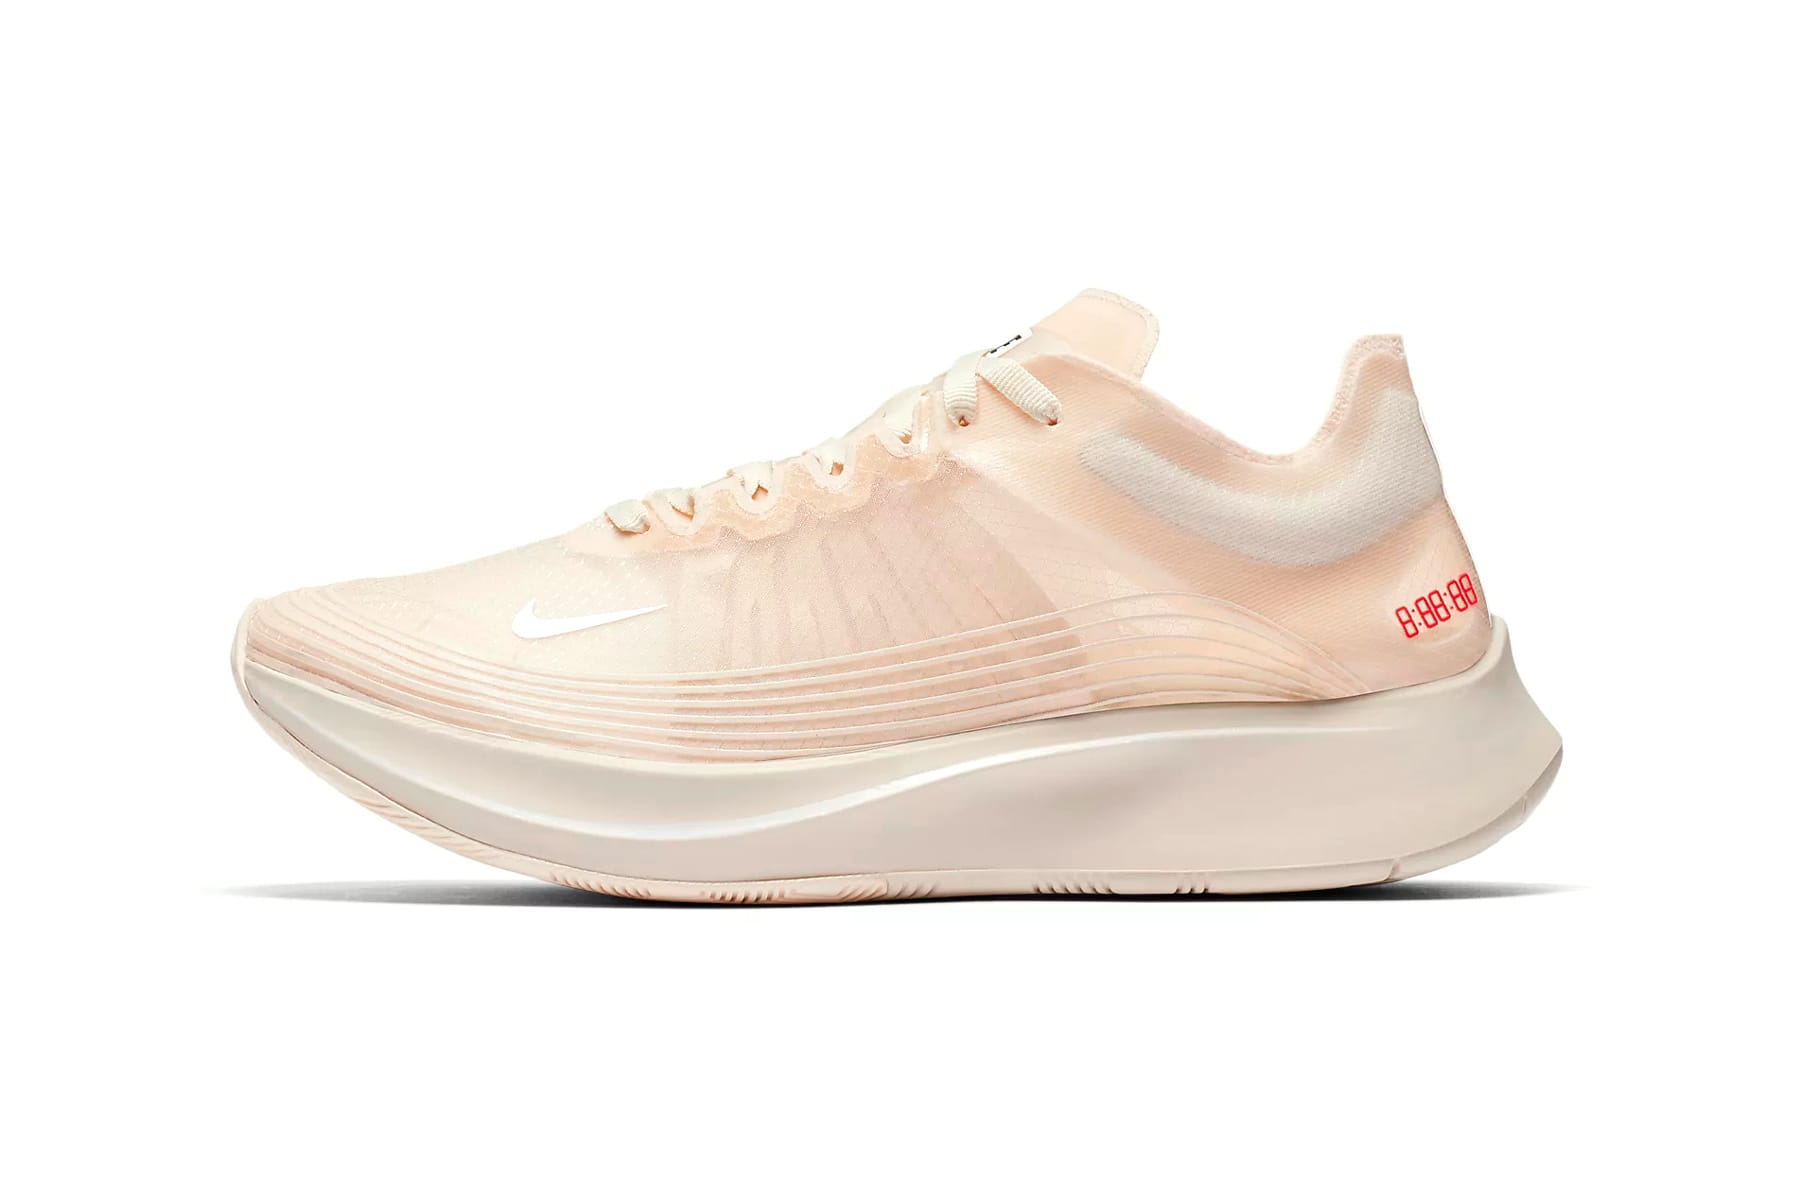 Nike Zoom Fly SP Releases in Guava Ice 